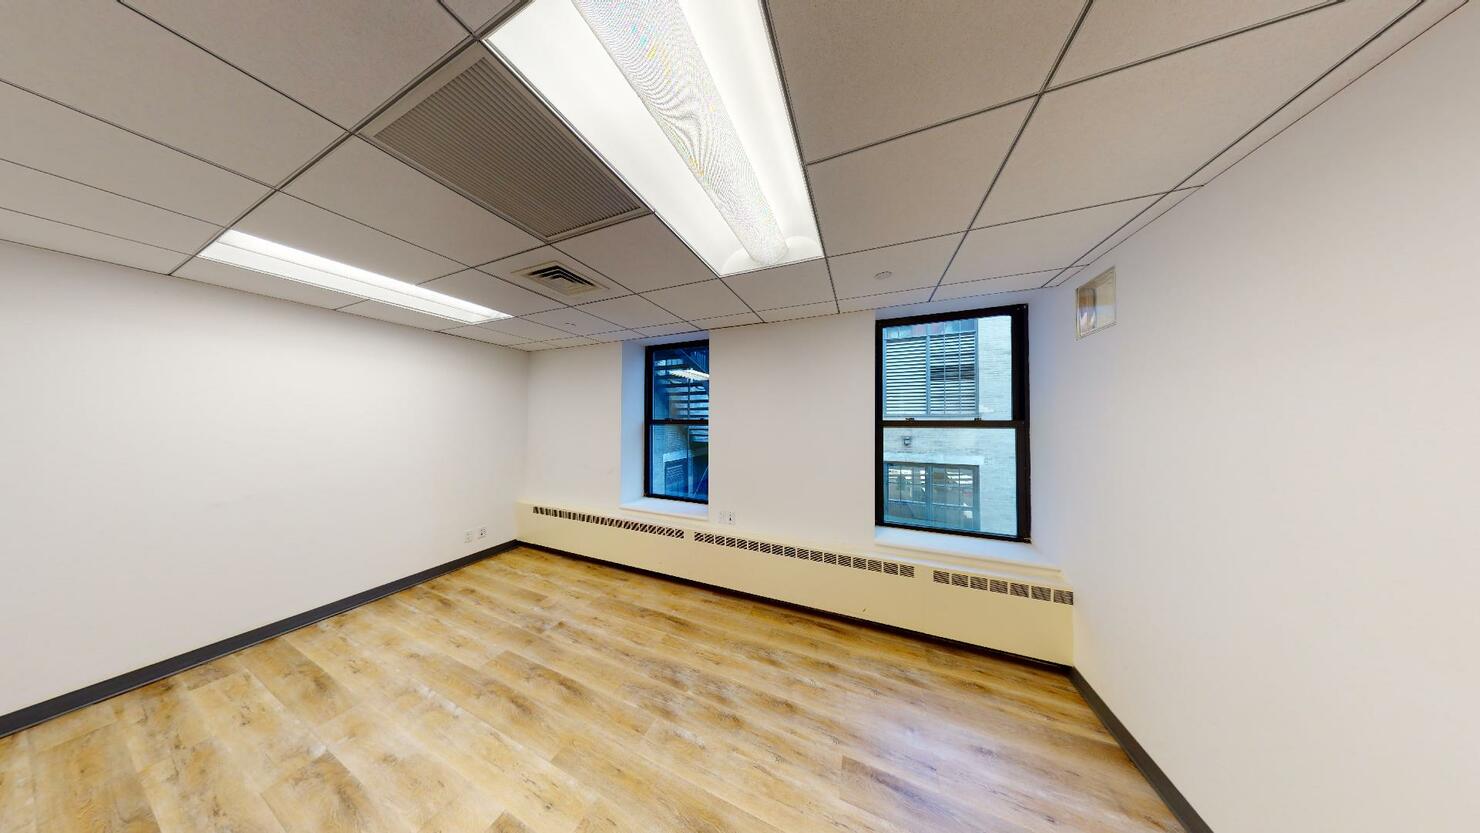 483 Tenth Avenue Office Space - Office Room with Large Windows